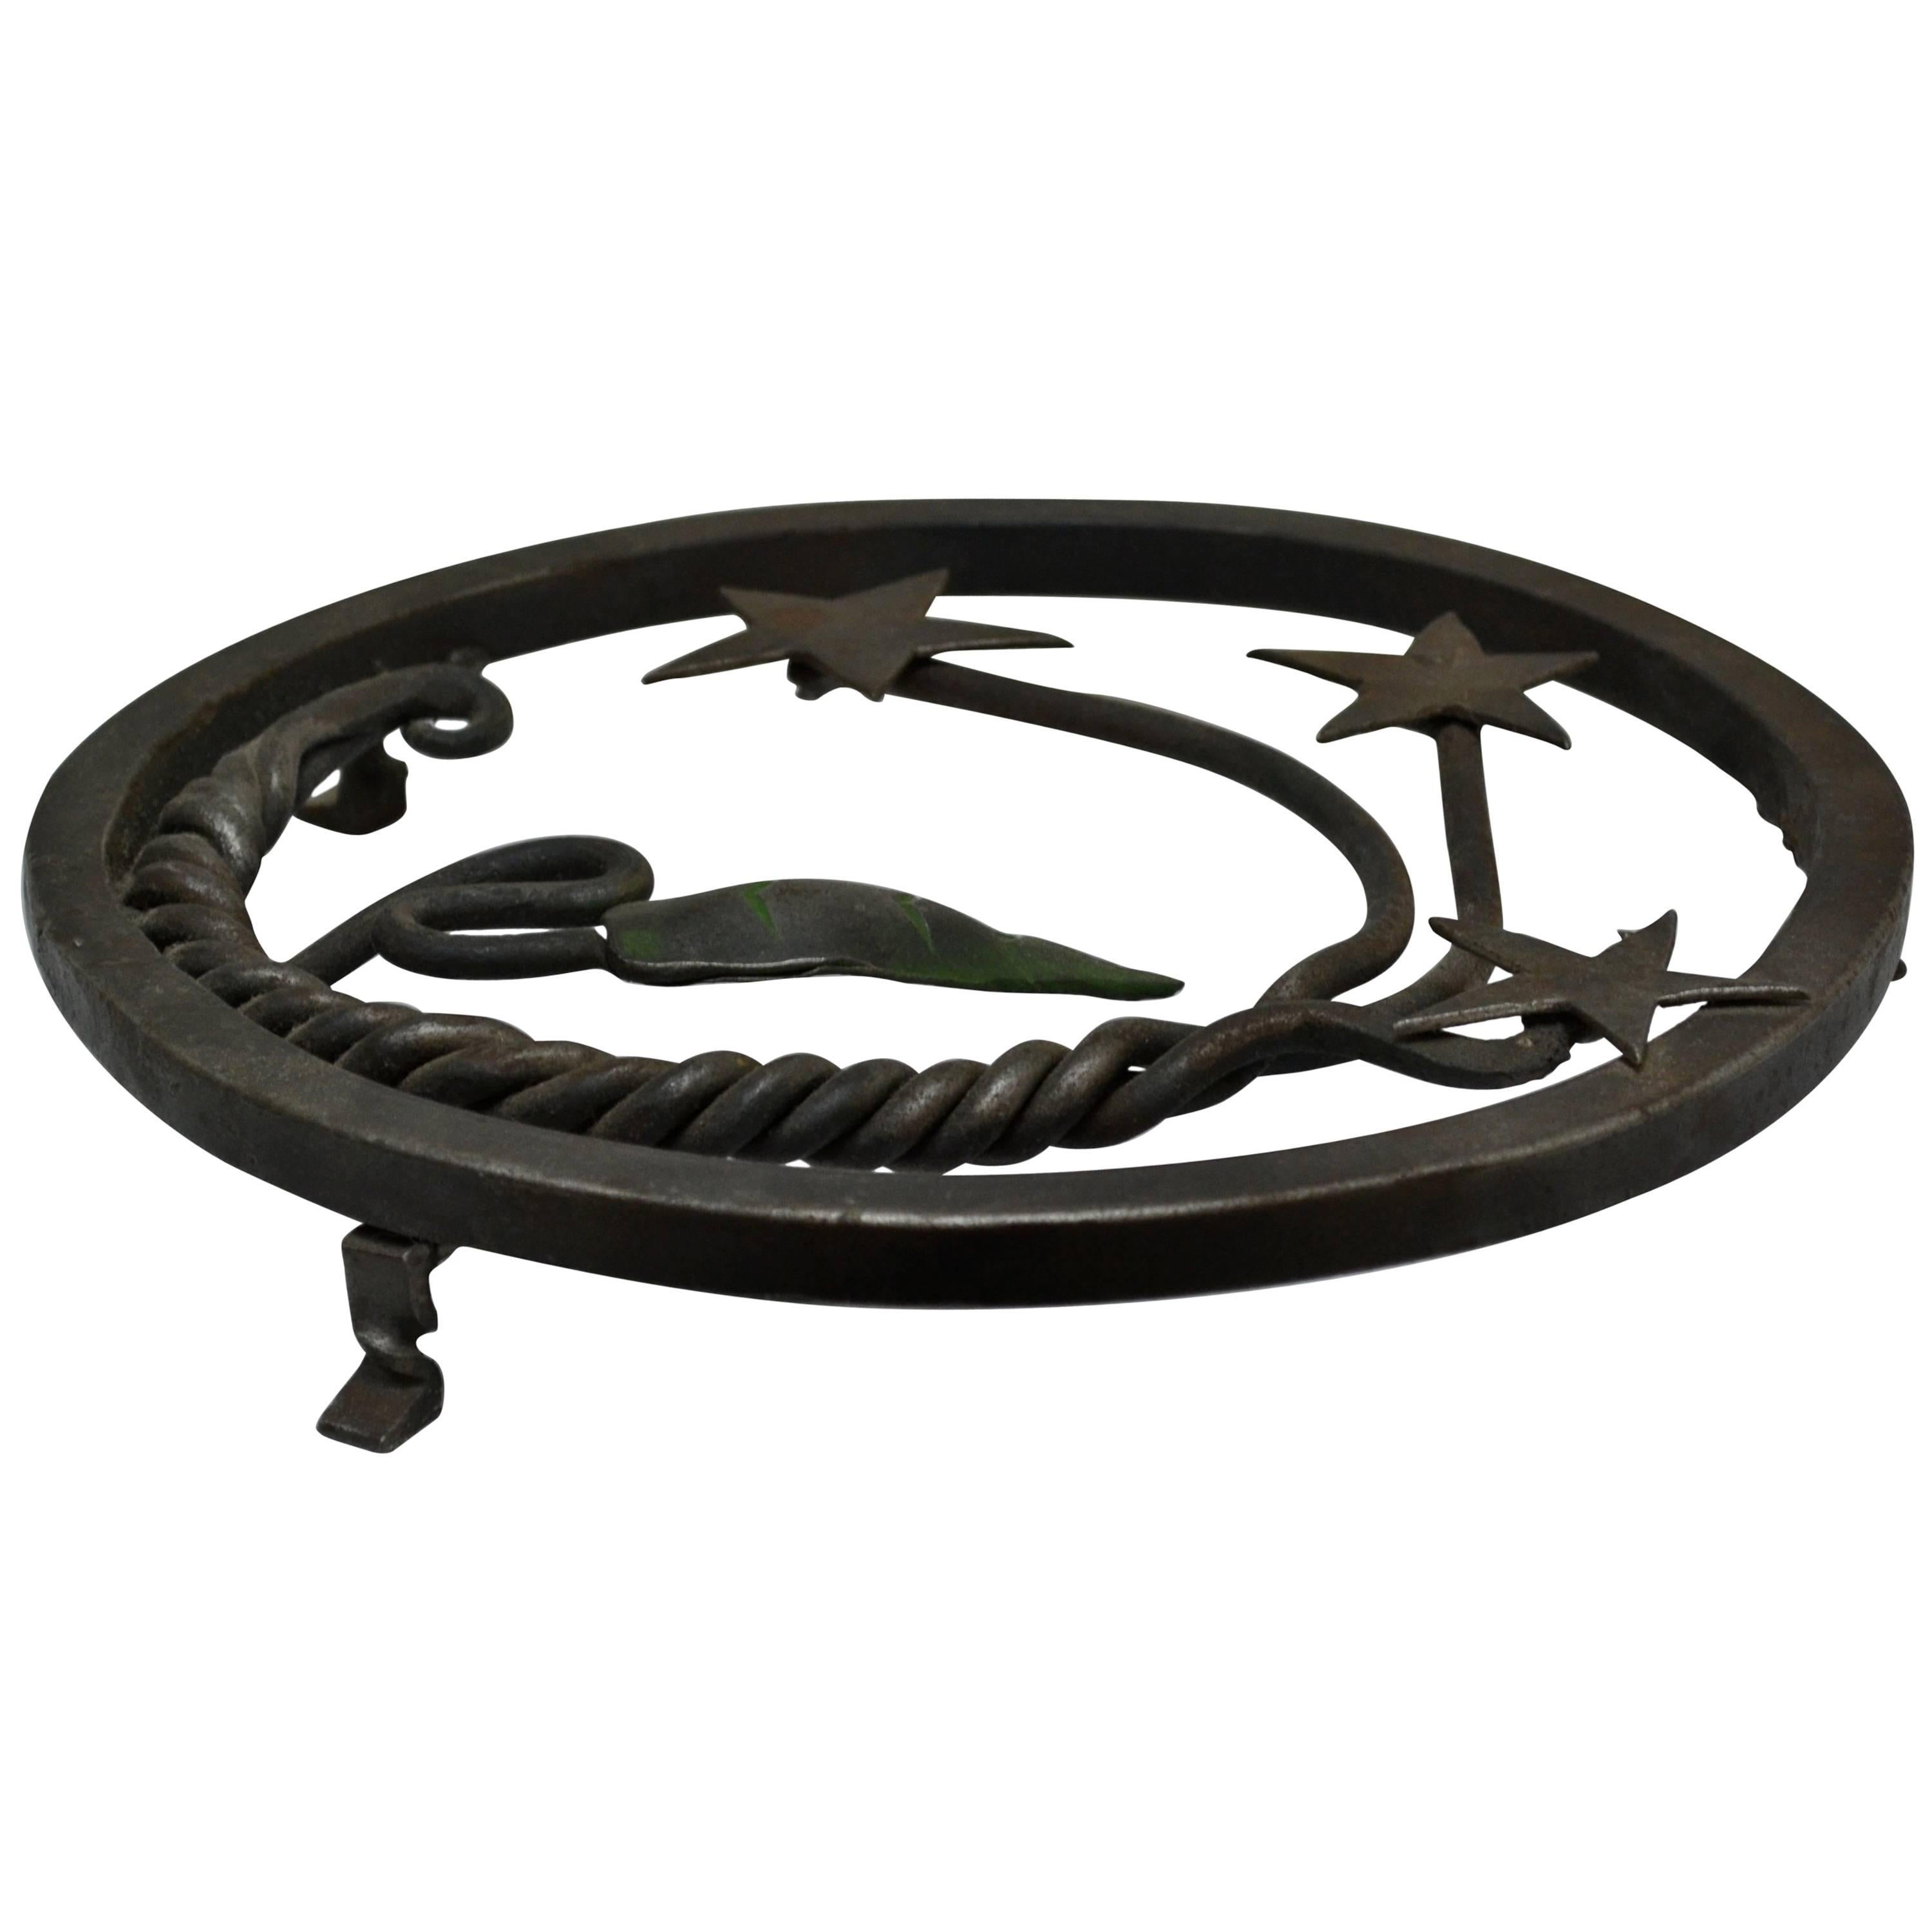 Hand-Forged Wrought Iron Trivet For Sale